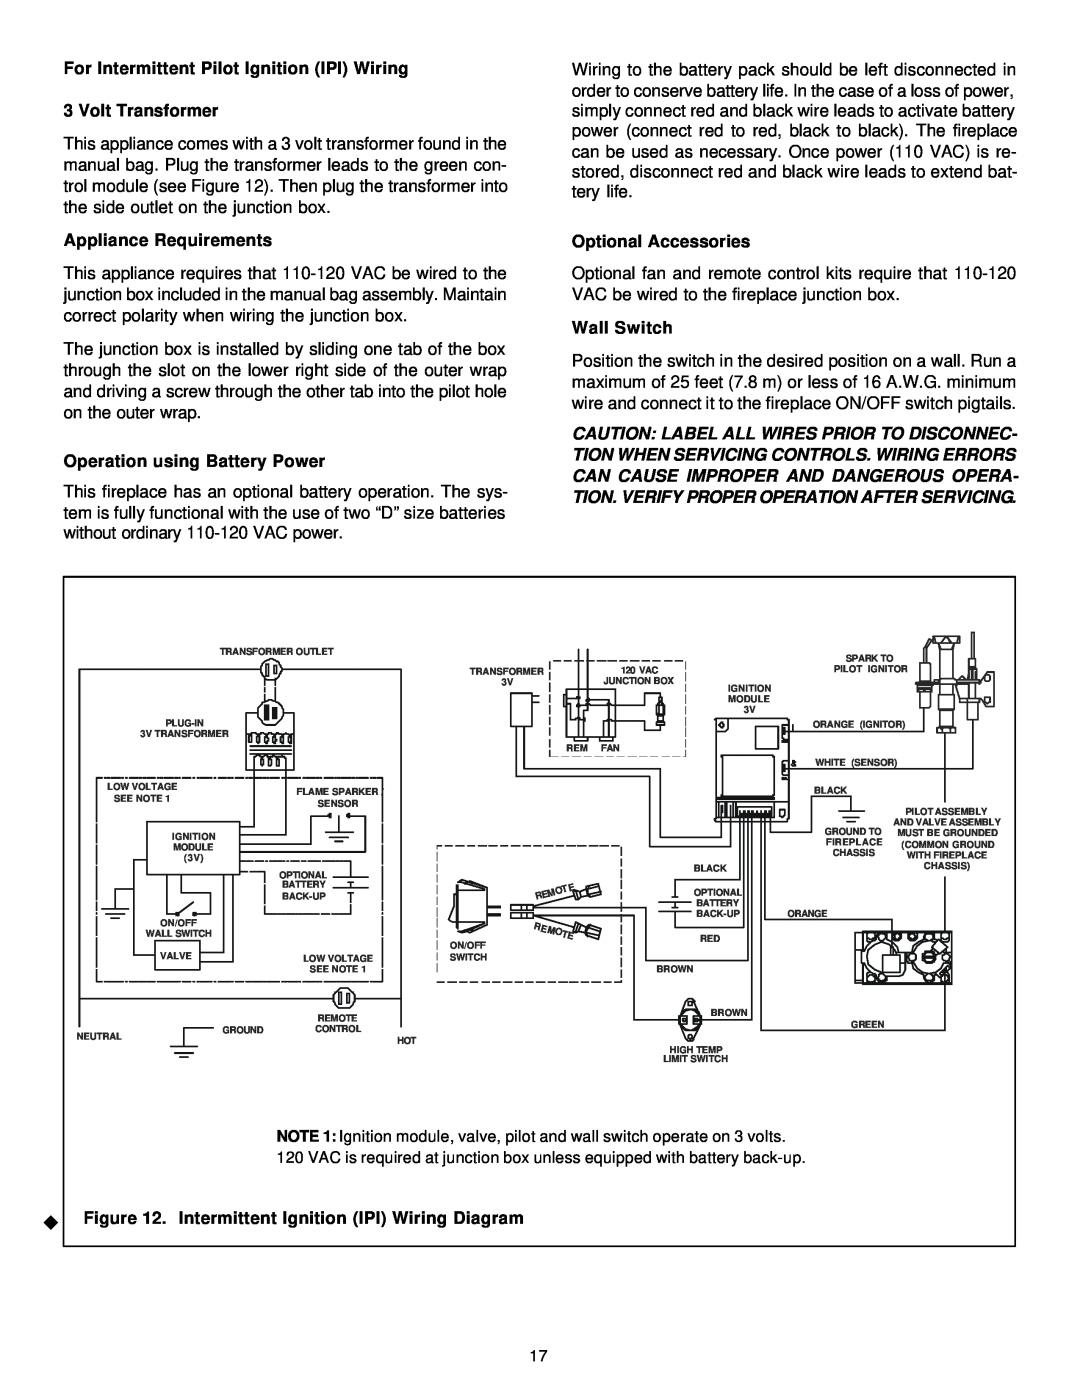 Heat & Glo LifeStyle 8000TVD manual For Intermittent Pilot Ignition IPI Wiring, Volt Transformer, Appliance Requirements 